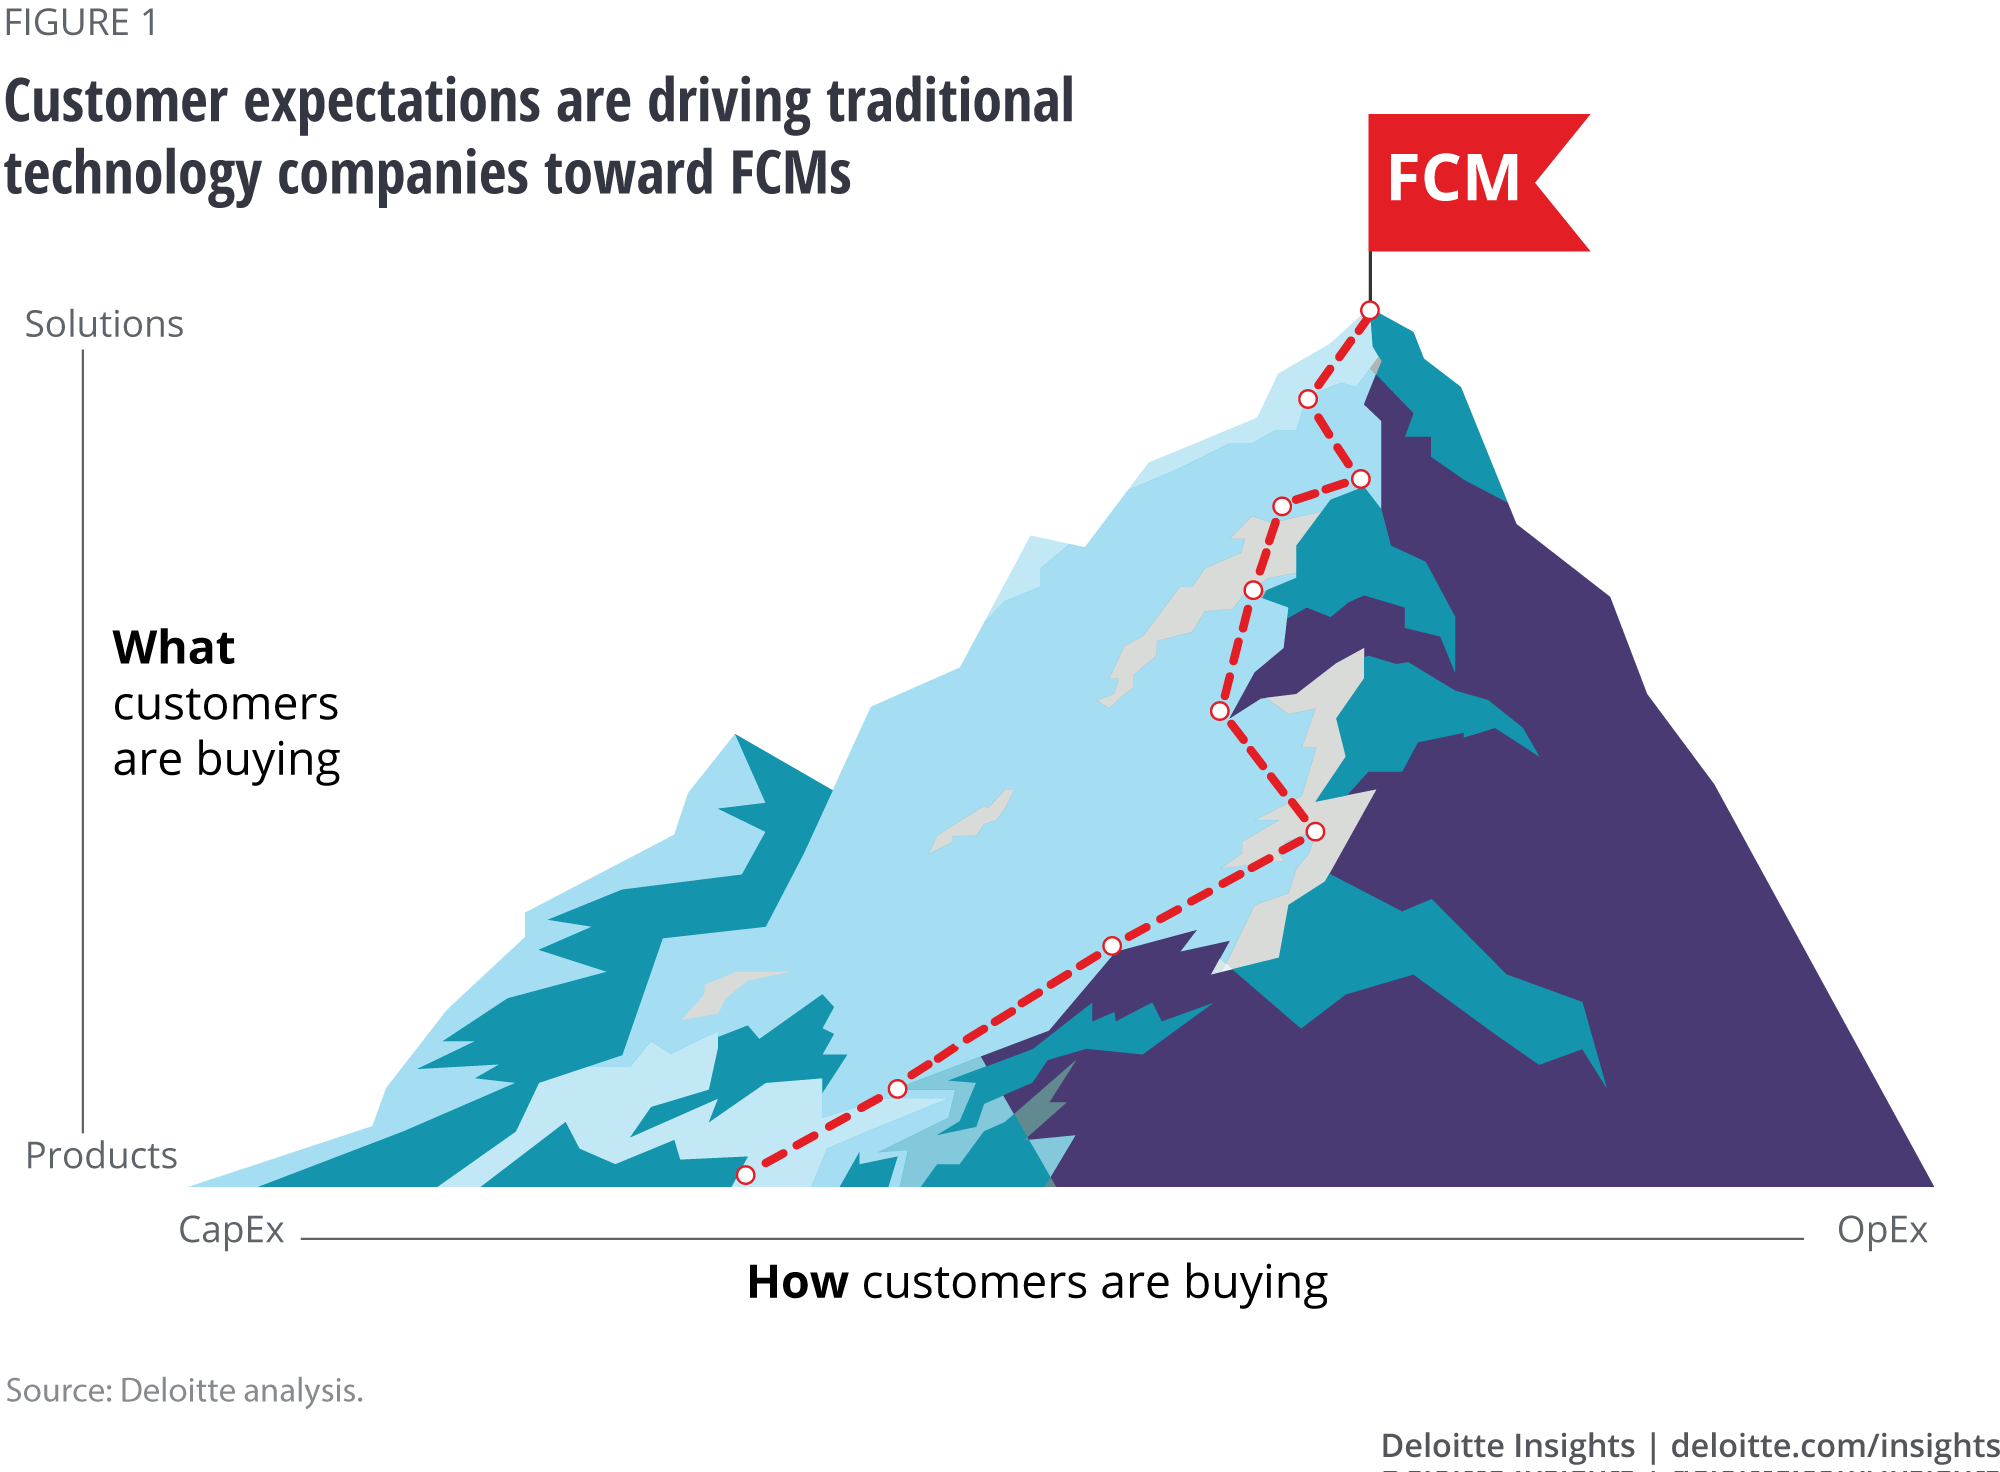 Customer expectations are driving traditional technology companies toward FCMs